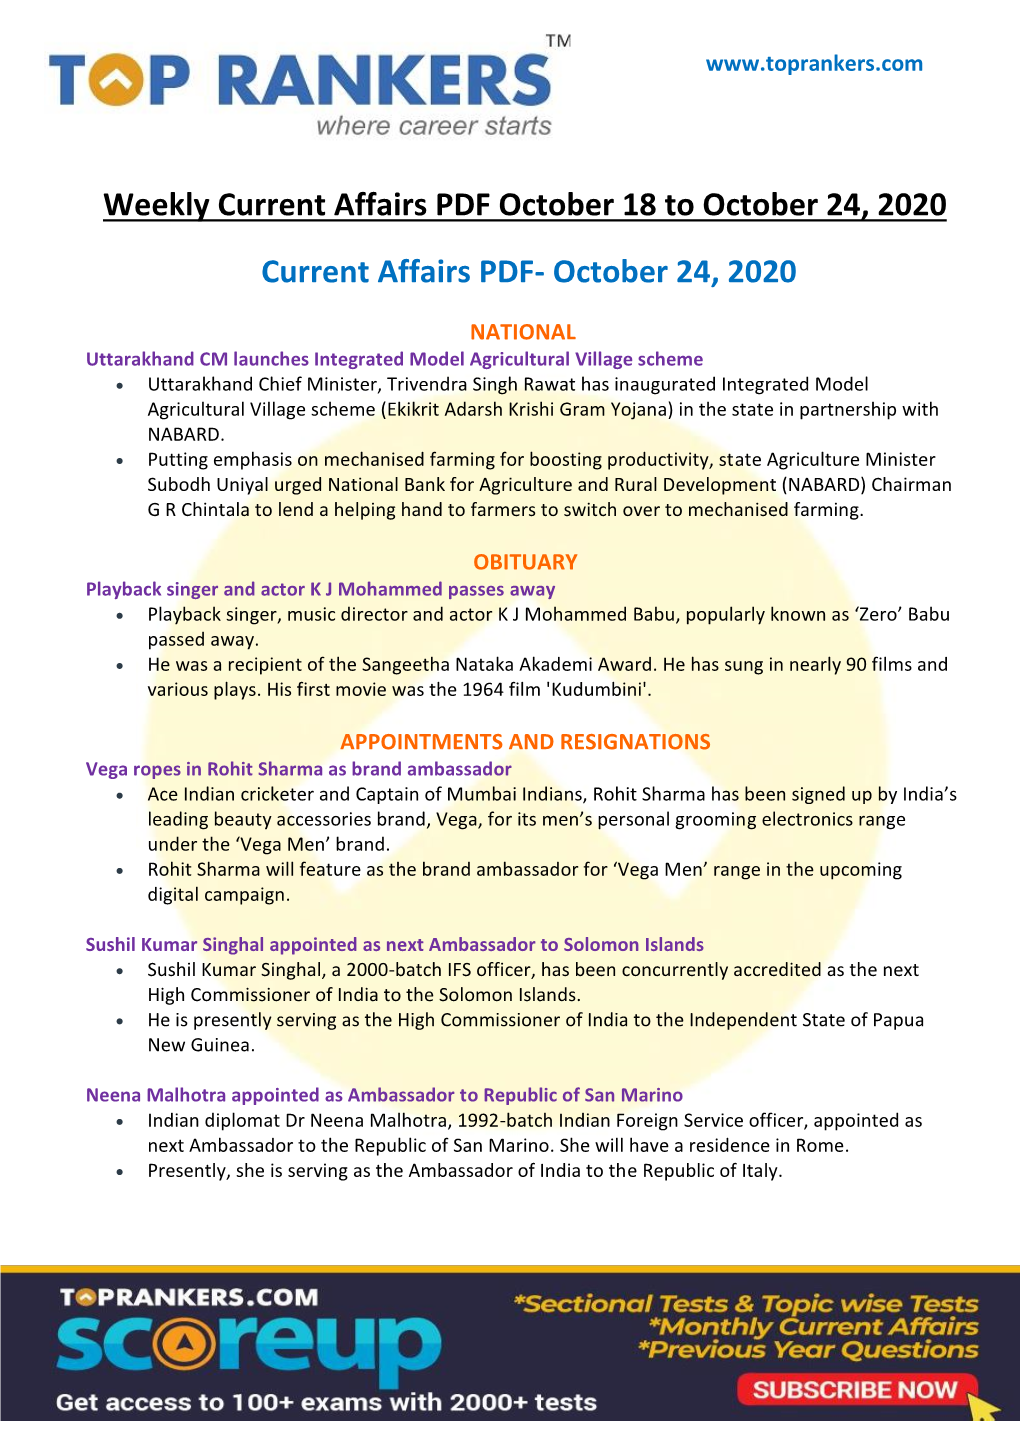 Current Affairs PDF October 18 to October 24, 2020